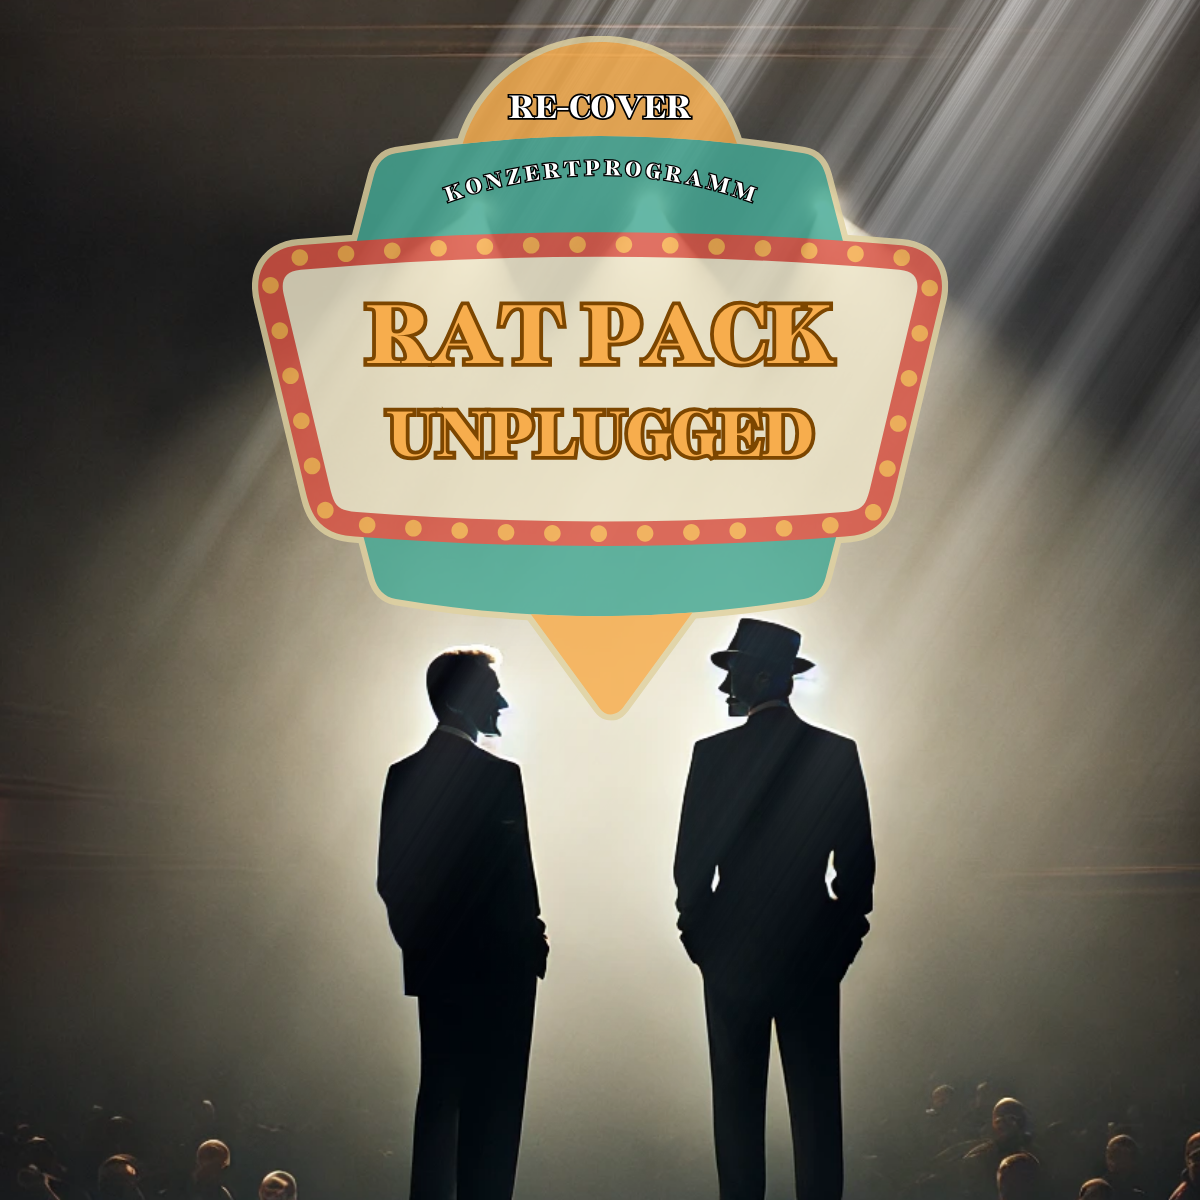 Re-Cover - Rat Pack unplugged